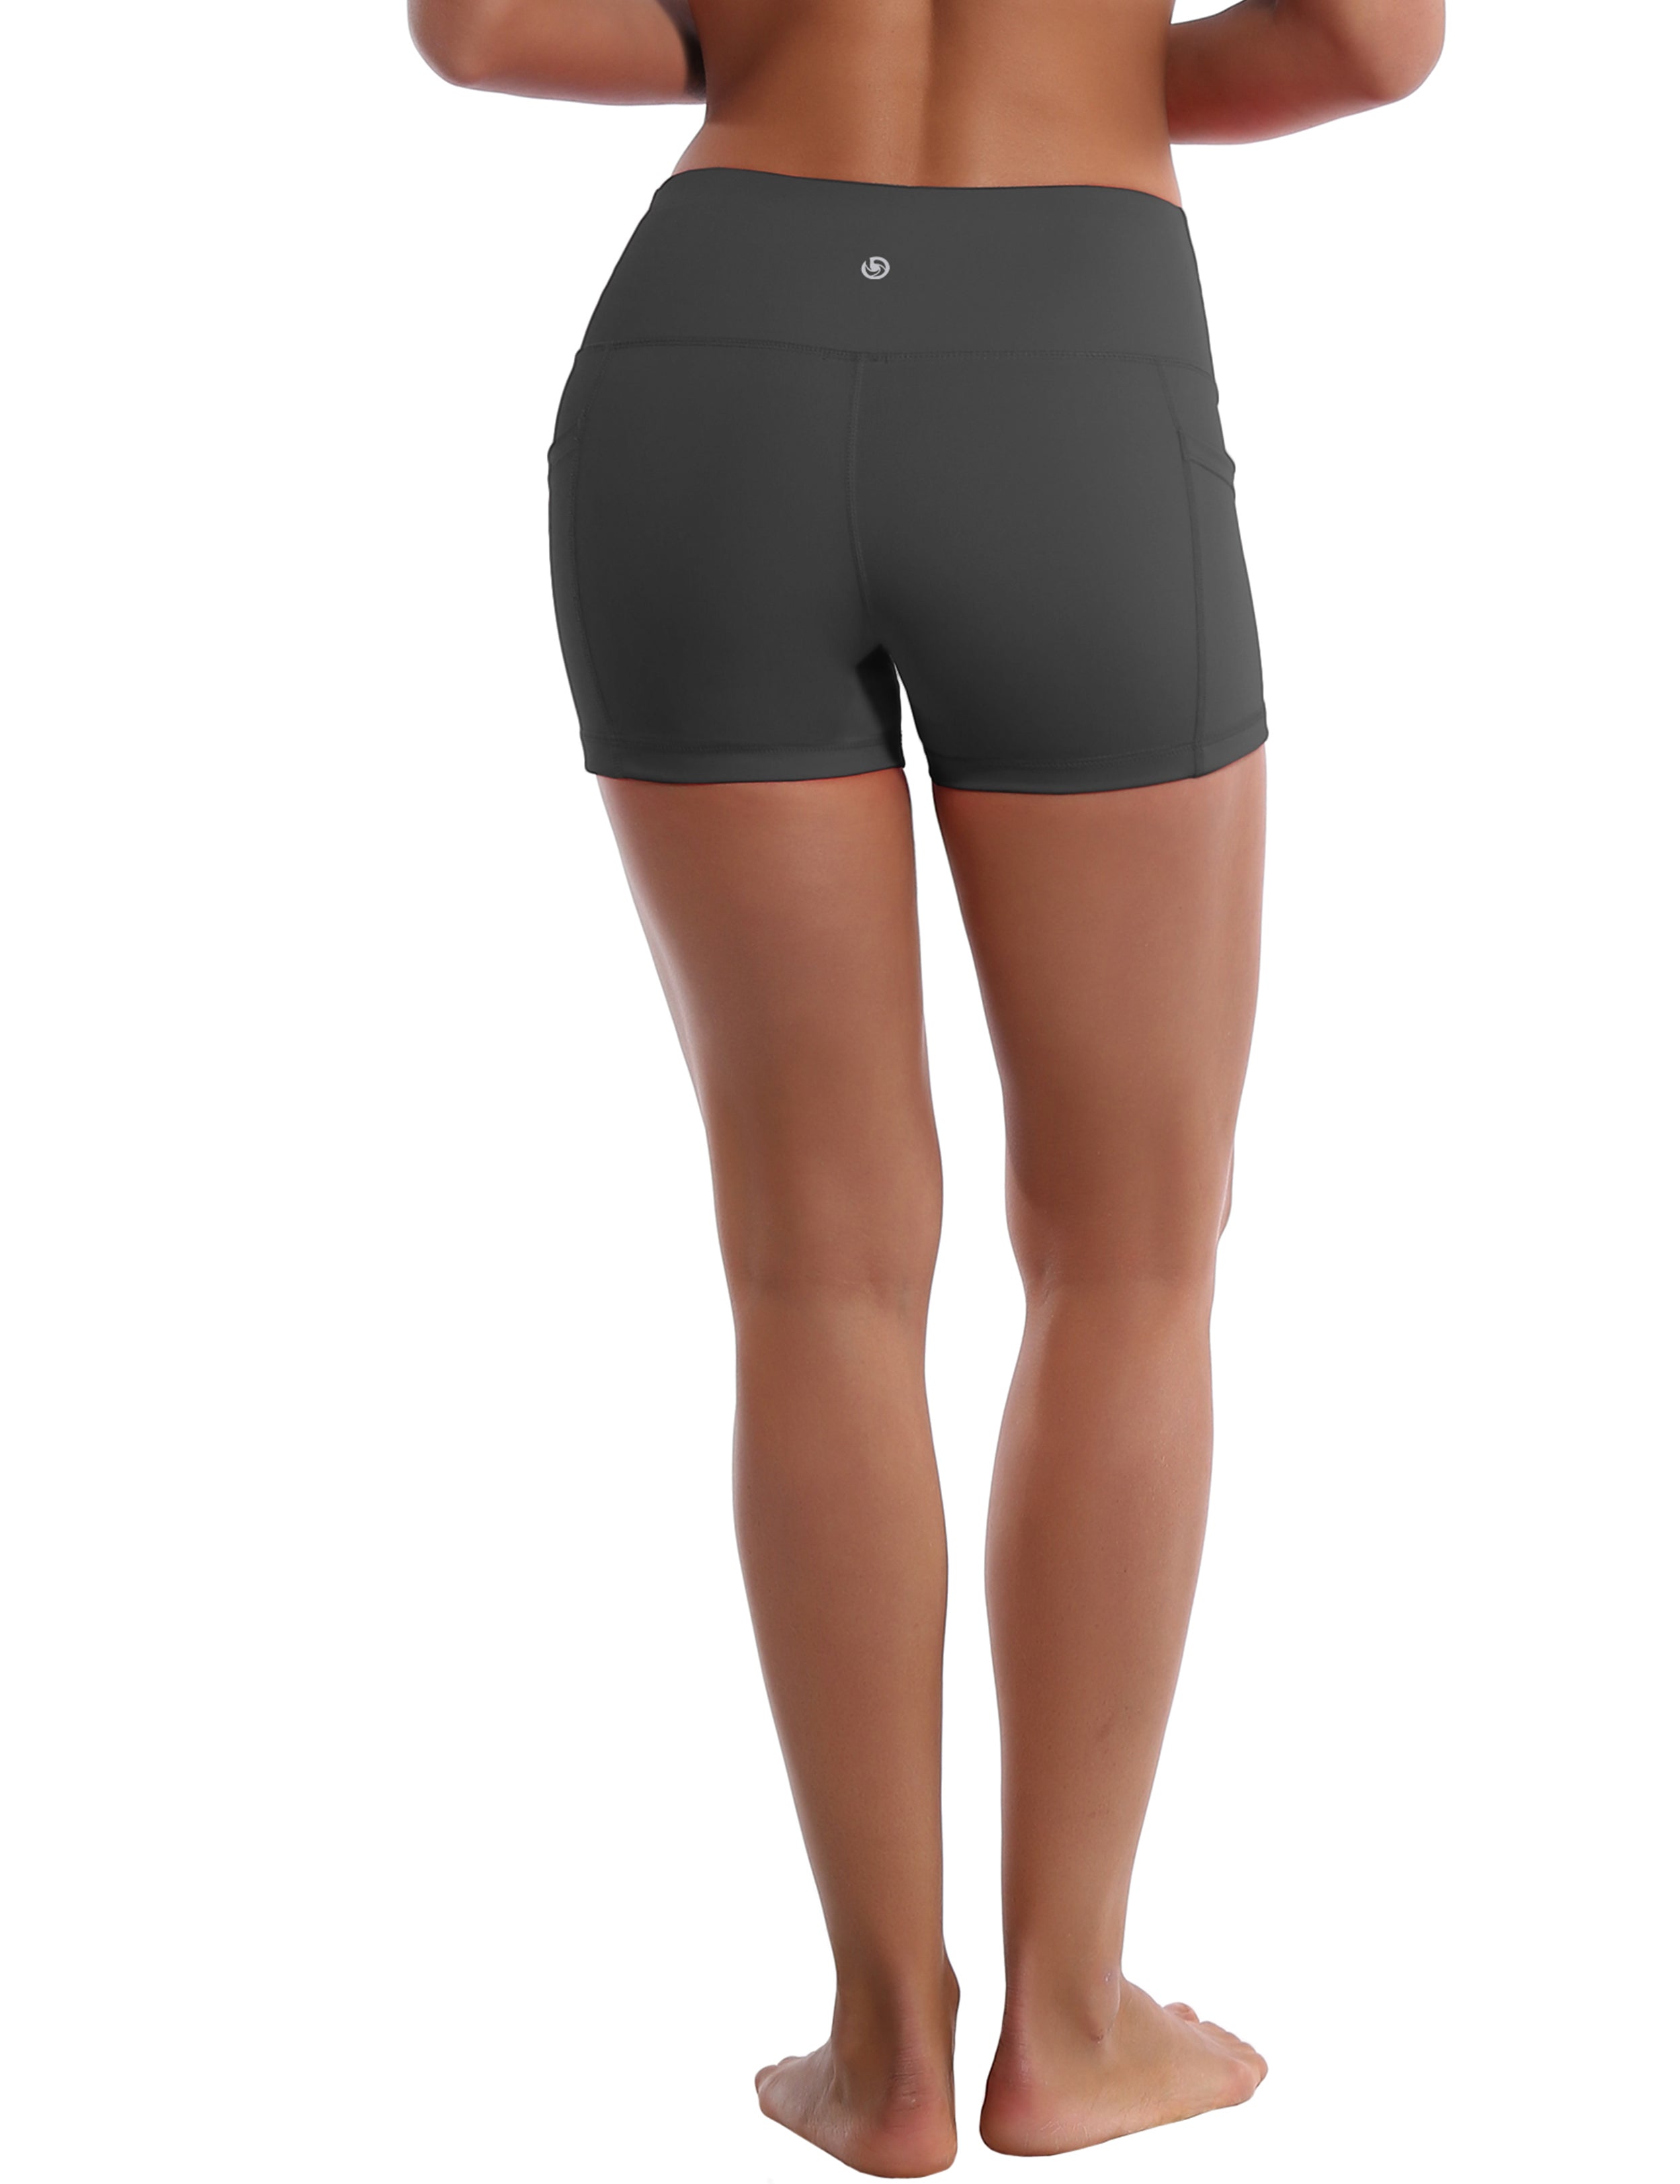 2.5" Side Pockets Pilates Shorts shadowcharcoal Sleek, soft, smooth and totally comfortable: our newest sexy style is here. Softest-ever fabric High elasticity High density 4-way stretch Fabric doesn't attract lint easily No see-through Moisture-wicking Machine wash 78% Polyester, 22% Spandex